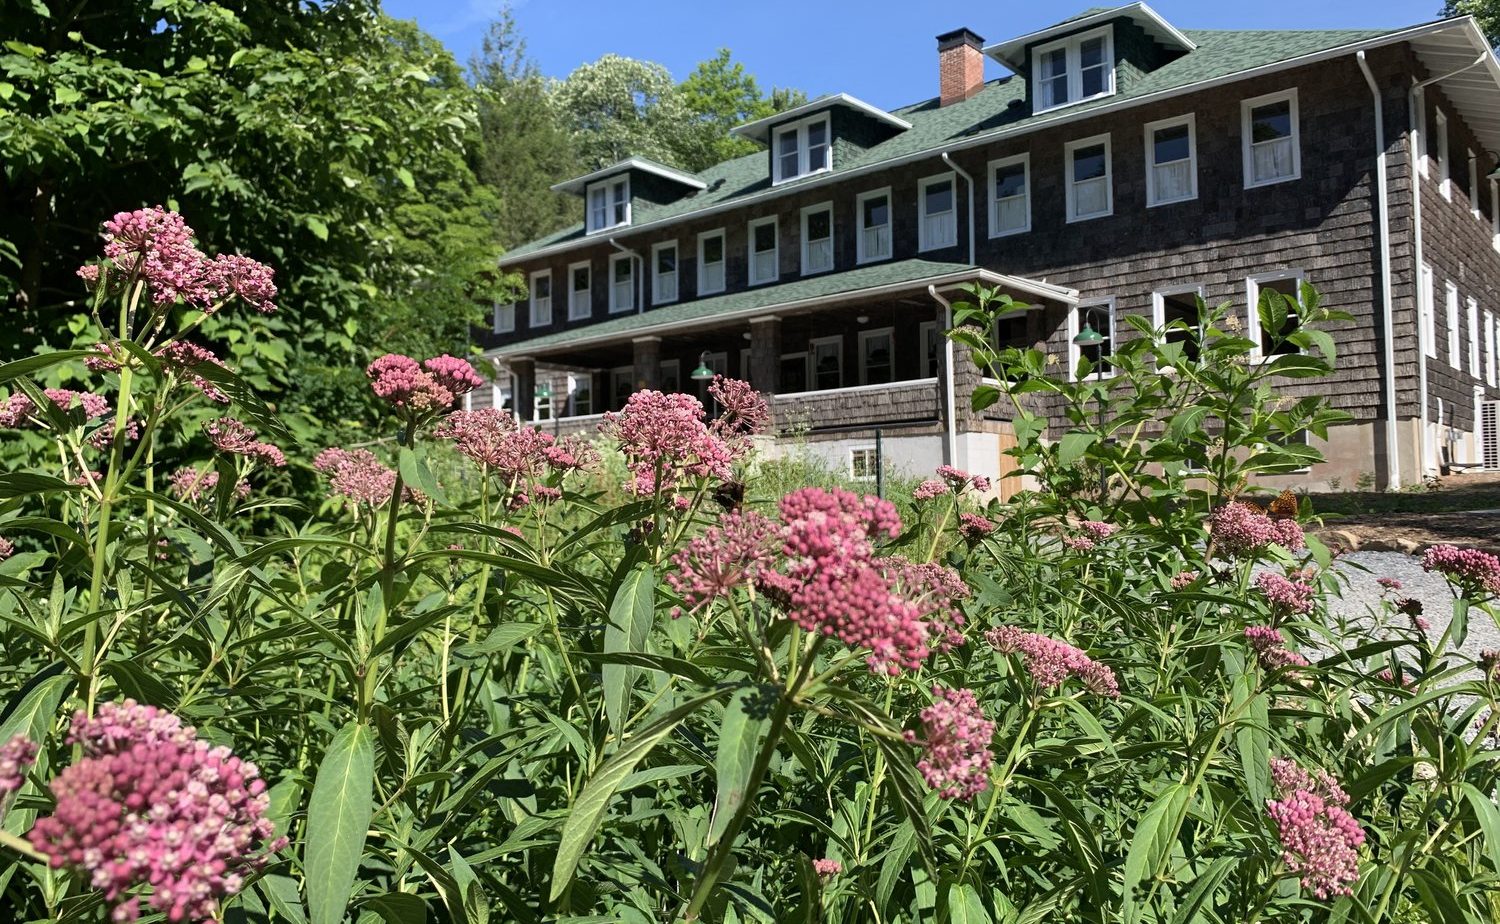 The Blue Ridge Discovery Center hosts immersive outdoor experiences out of its headquarters in the Historic Konnarock School building at the foot of Whitetop Mountain.